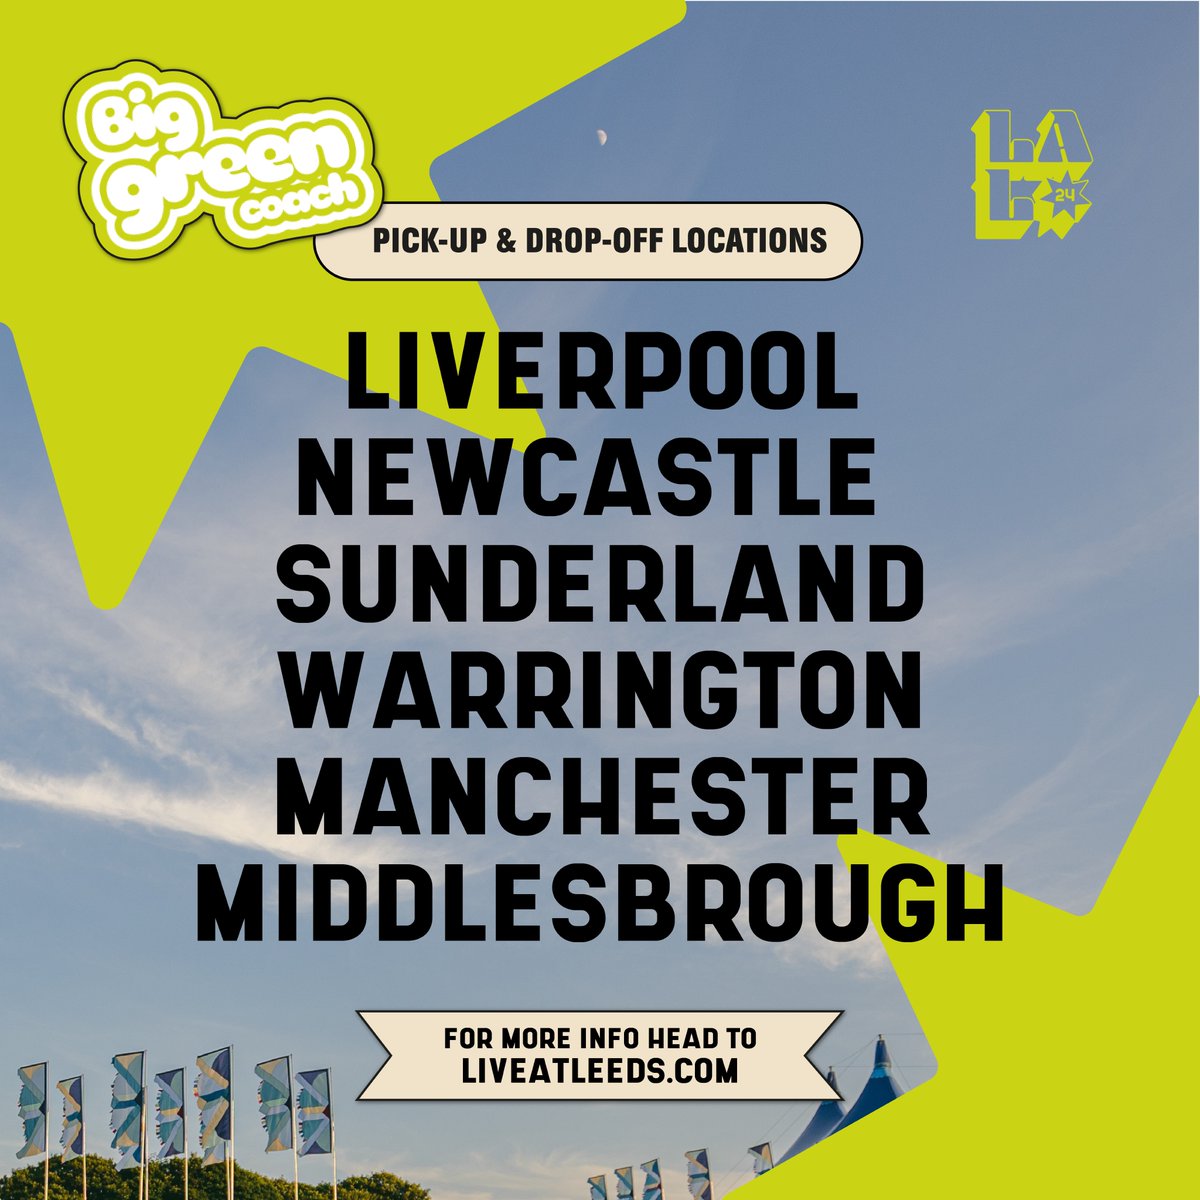 Have you got your Live At Leeds In The Park crew together yet? Need to sort travel? 🚌 Secure your coach travel with @biggreencoach offering sustainable return travel directly to & from Temple Newsam Park! Locations below.. Secure your travel here 🎟️👉 liveatleeds.com